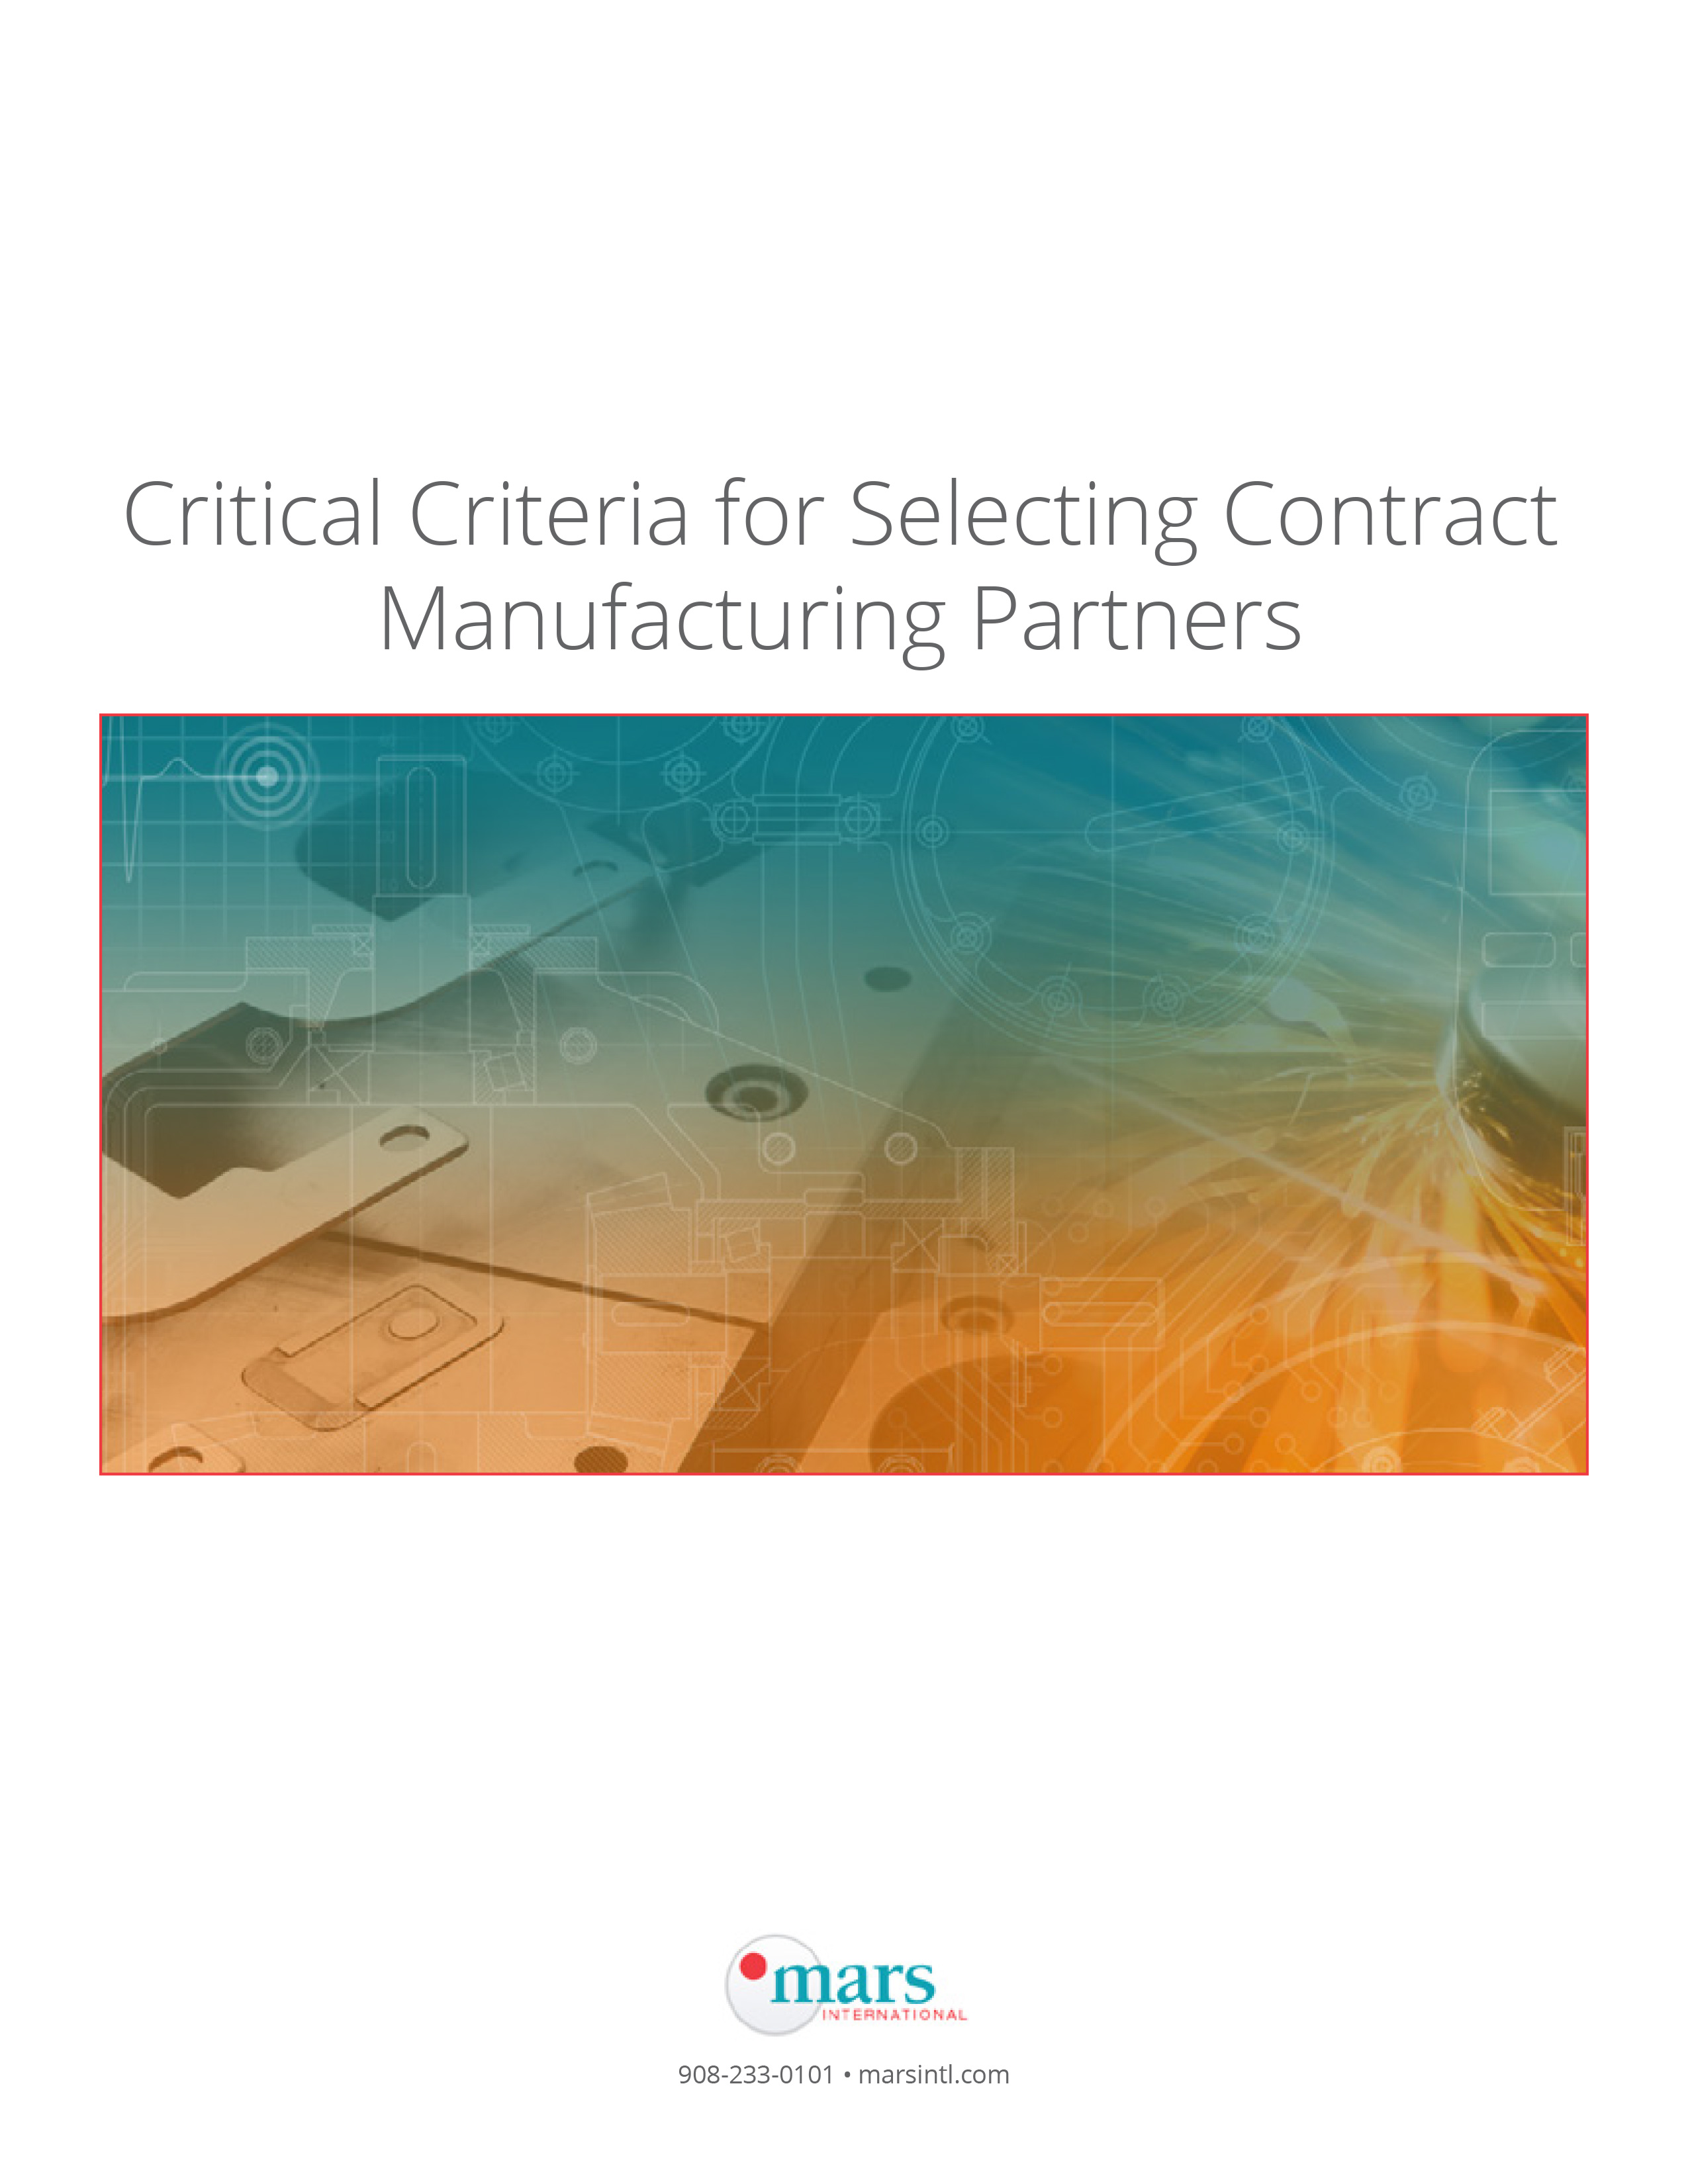 Critical Criteria for Selecting Contract Manufacturing Partners